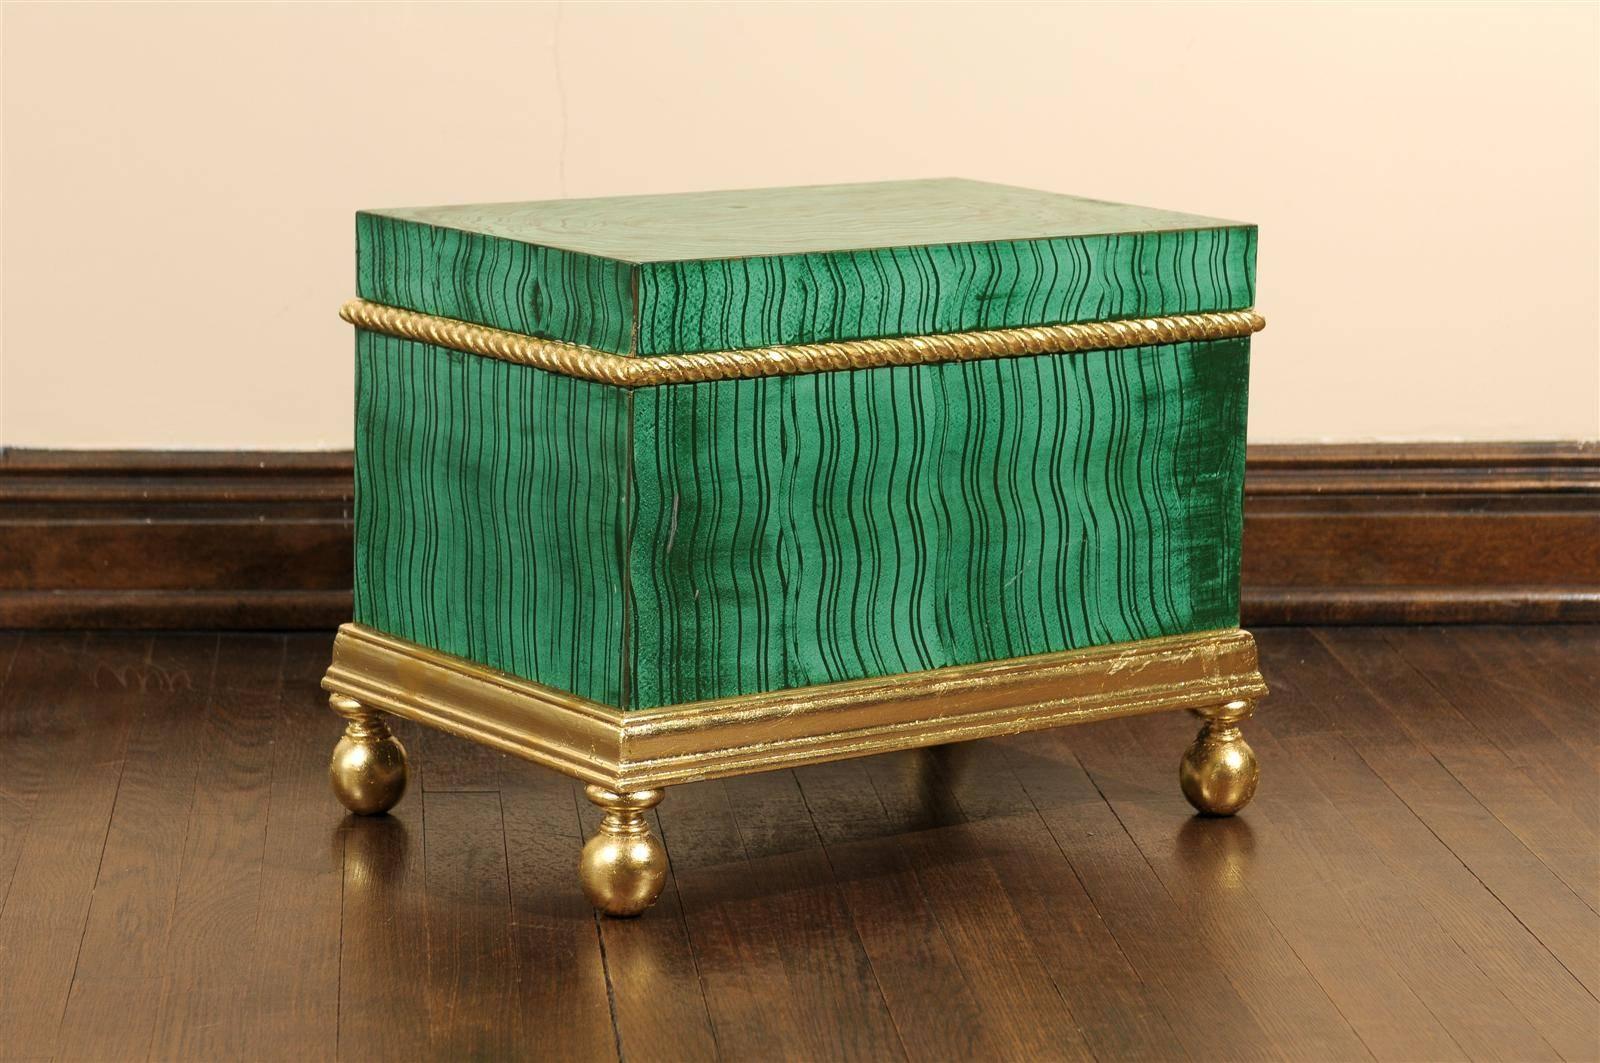 Hollywood Regency wooden chest or trunk hand-painted in a faux malachite design with gold leaf piping beneath a removable lid and raised on a gold leaf stand with bun feet.